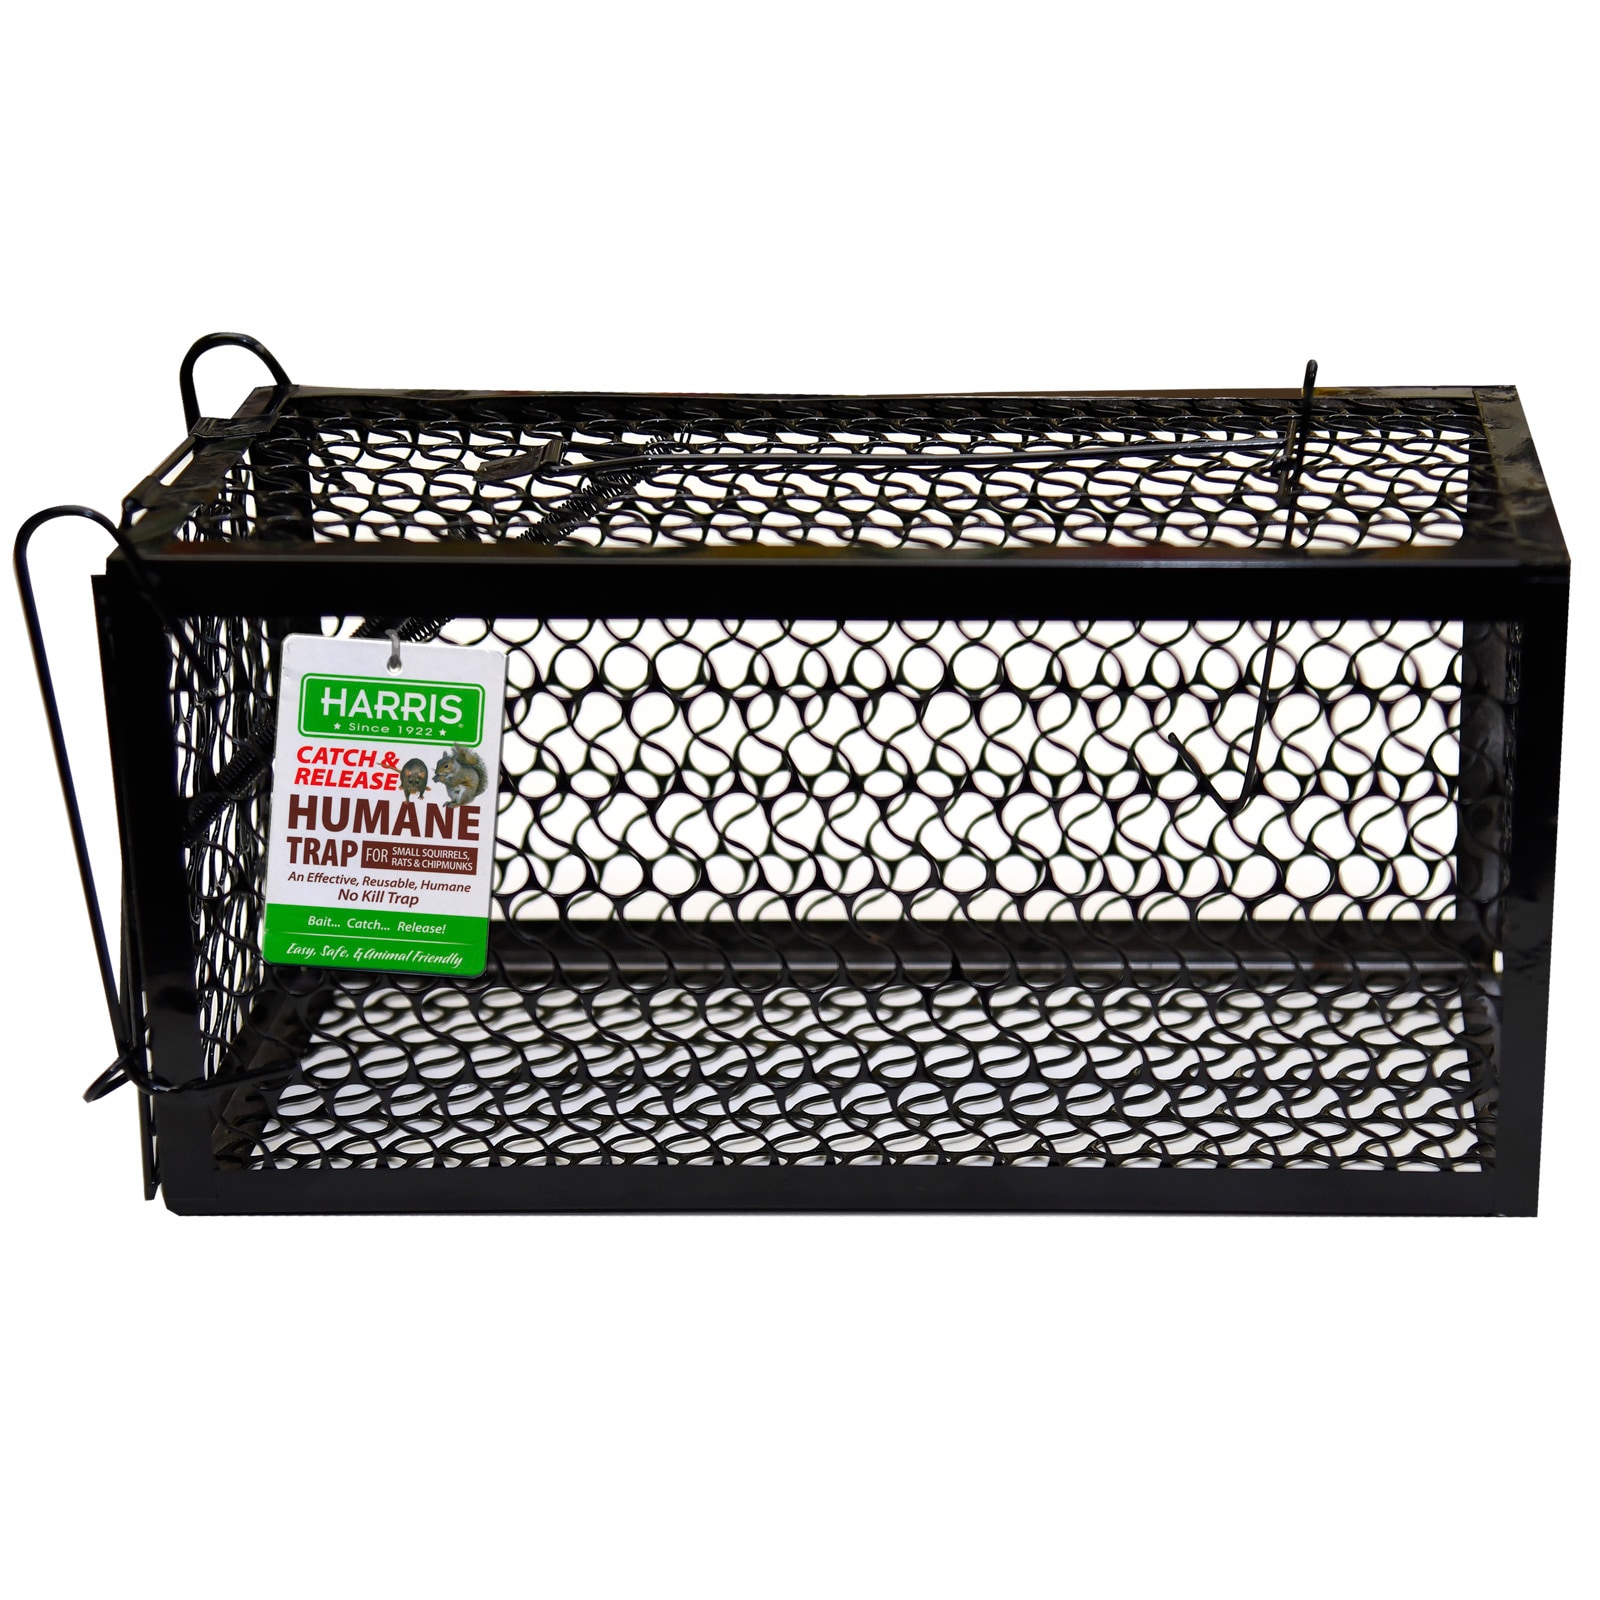 Details about   RAT CATCHER SPRING CAGE TRAP HUMANE LARGE LIVE ANIMAL RODENT INDOOR OUTDOOR 